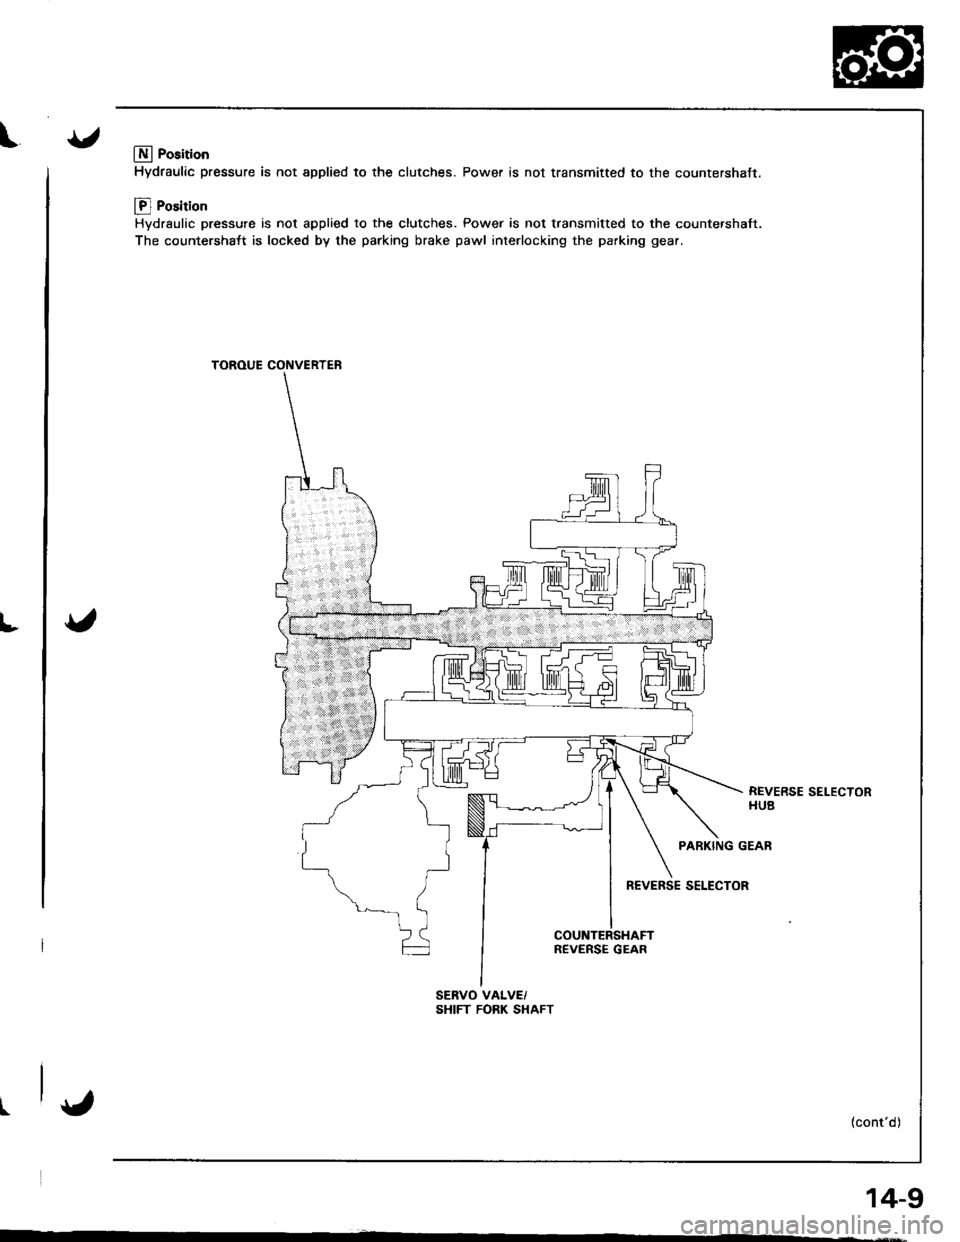 HONDA INTEGRA 1998 4.G Workshop Manual l
t
LNI Position
Hydraulic pressure is not applied to the clutches. Power is not transmitted to the countershaft.
[] Position
Hydrsulic pressure is not applied 10 the clutches. Power is not transmitt